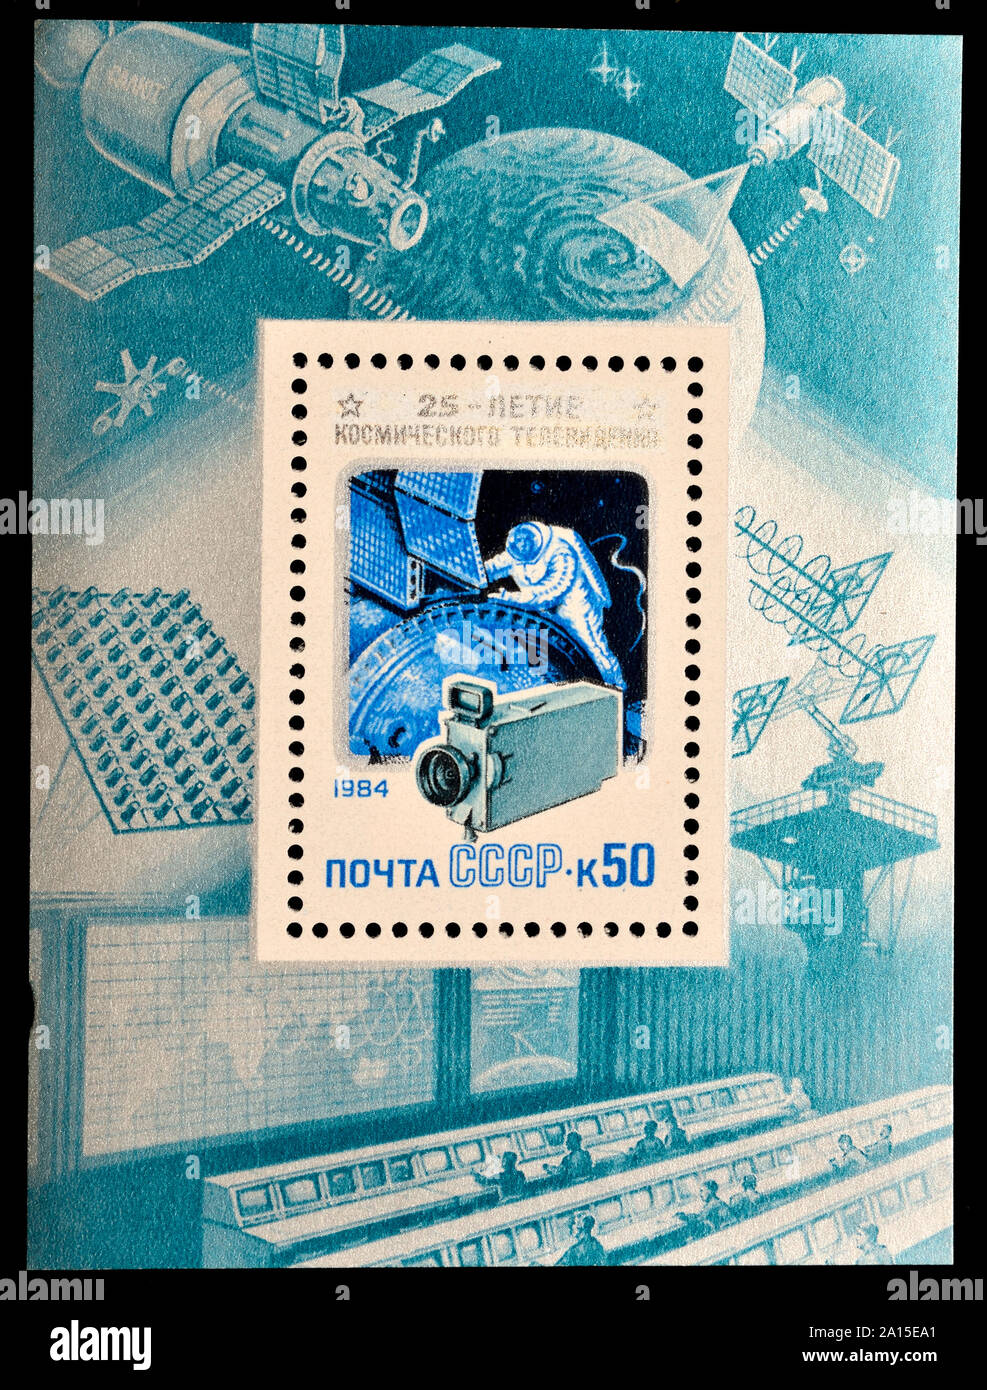 Soviet Union postage stamp mini sheet (1984) : 25th Anniversary of TV in Space. Stock Photo